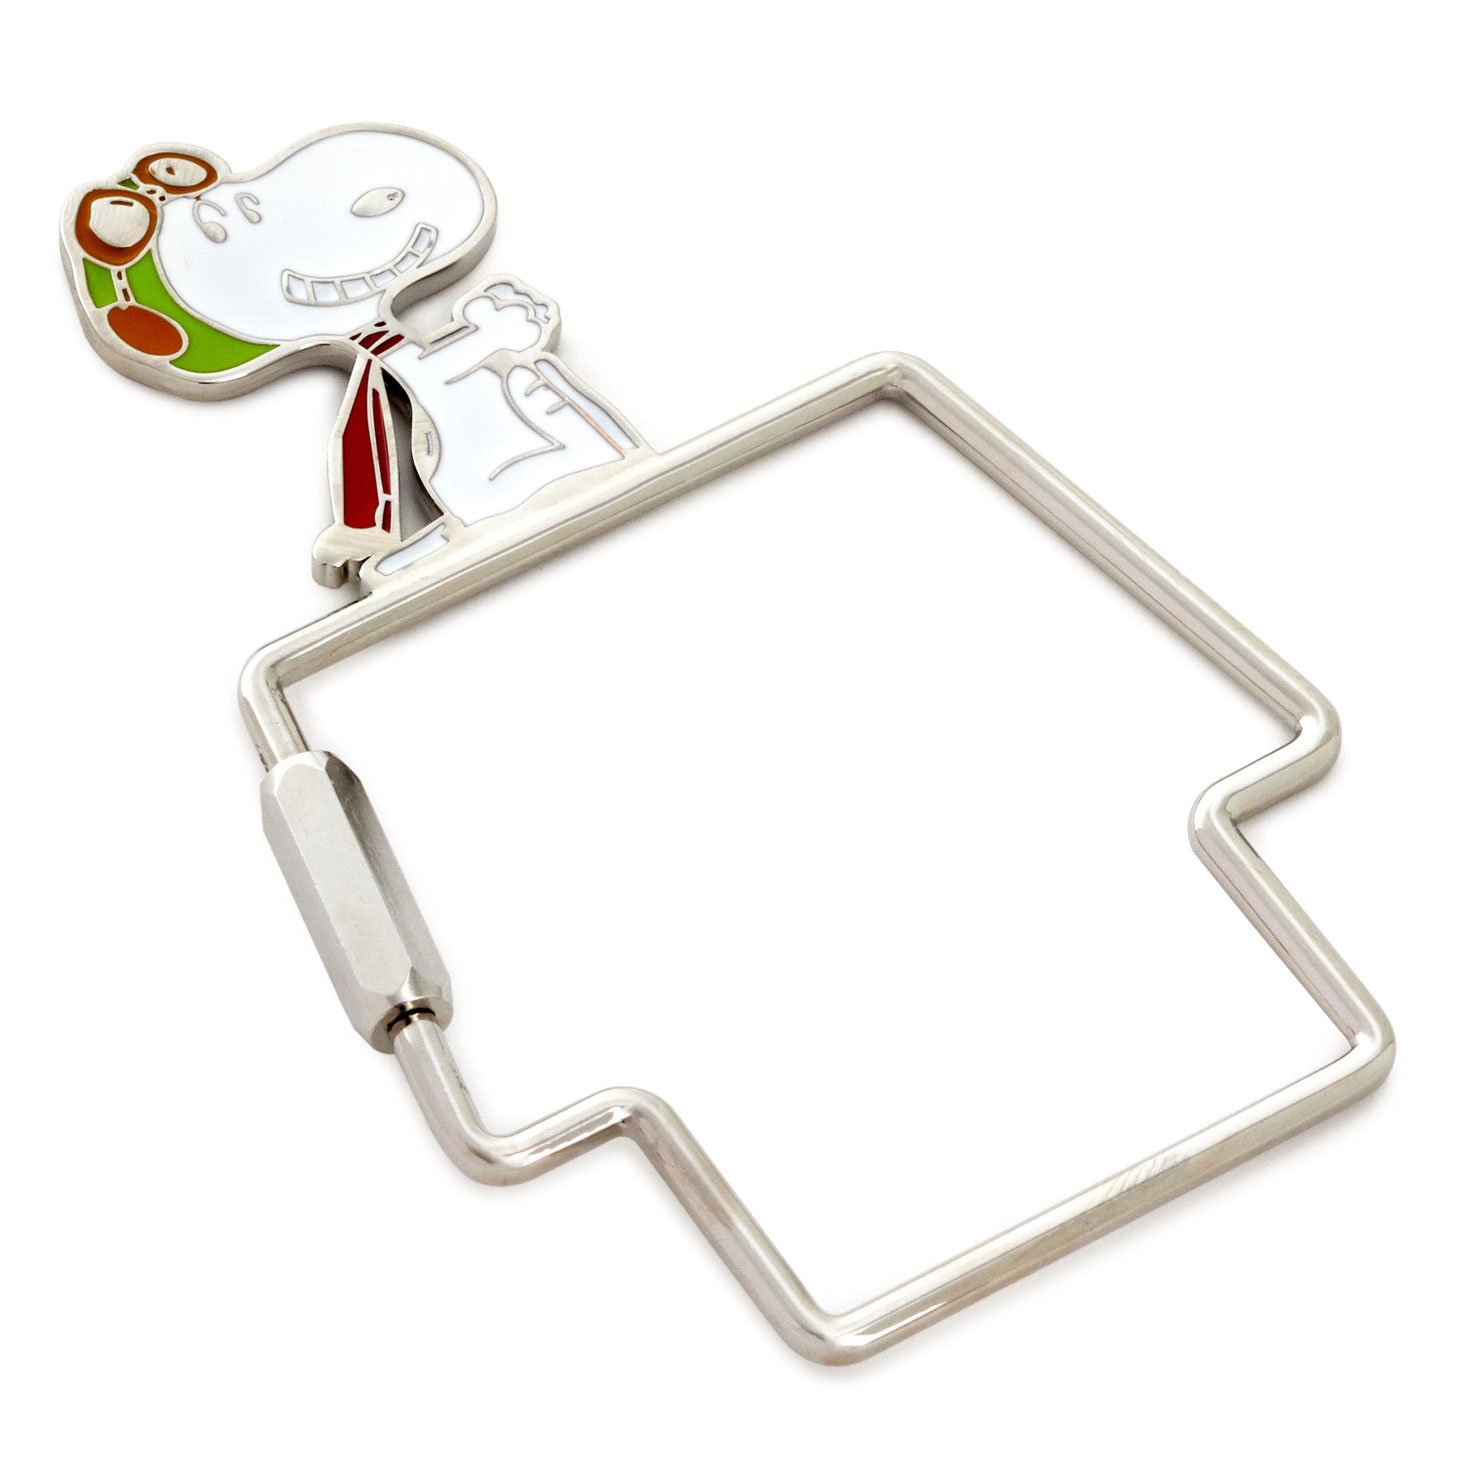 Peanuts Snoopy The Flying Ace Doghouse-Shaped Keychain